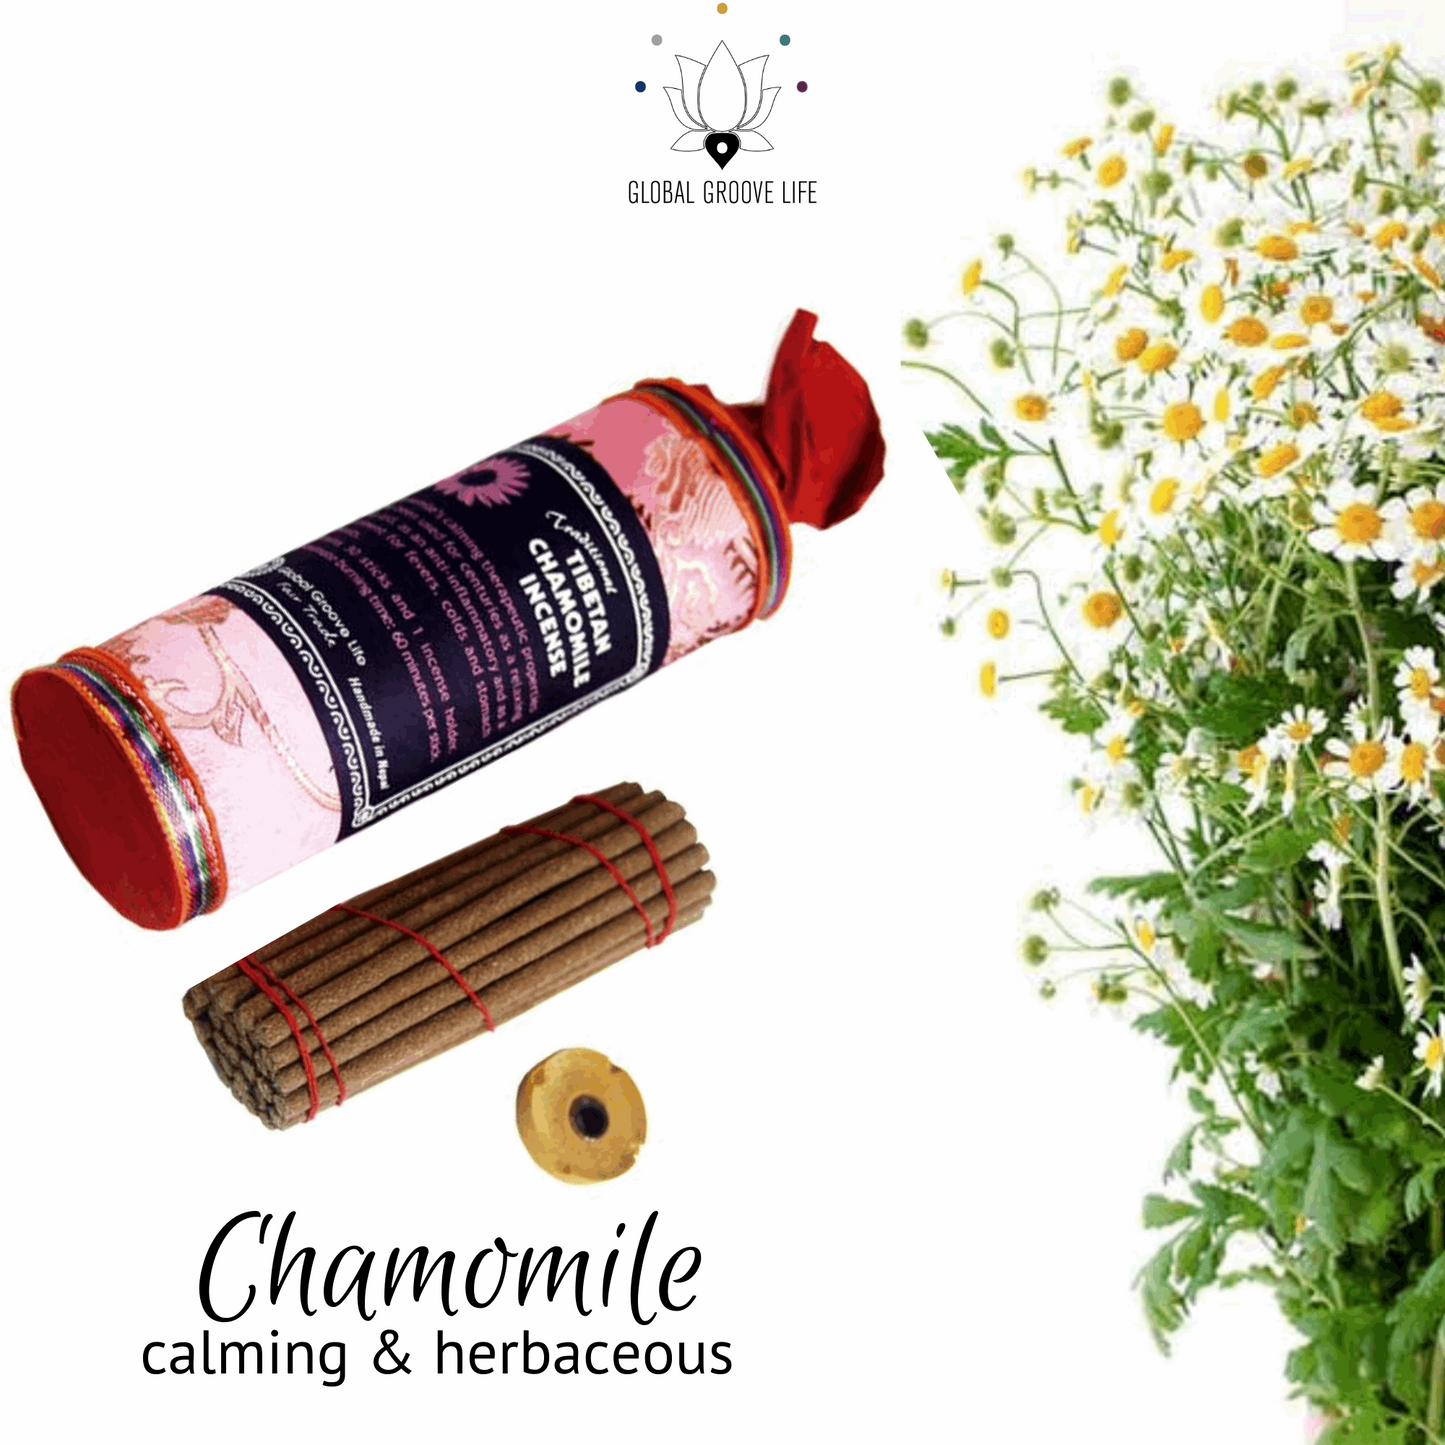 Chamomile Incense - All-natural handmade tibetan incense - Fairtrade Incense - Calming and herbaceous fragrance